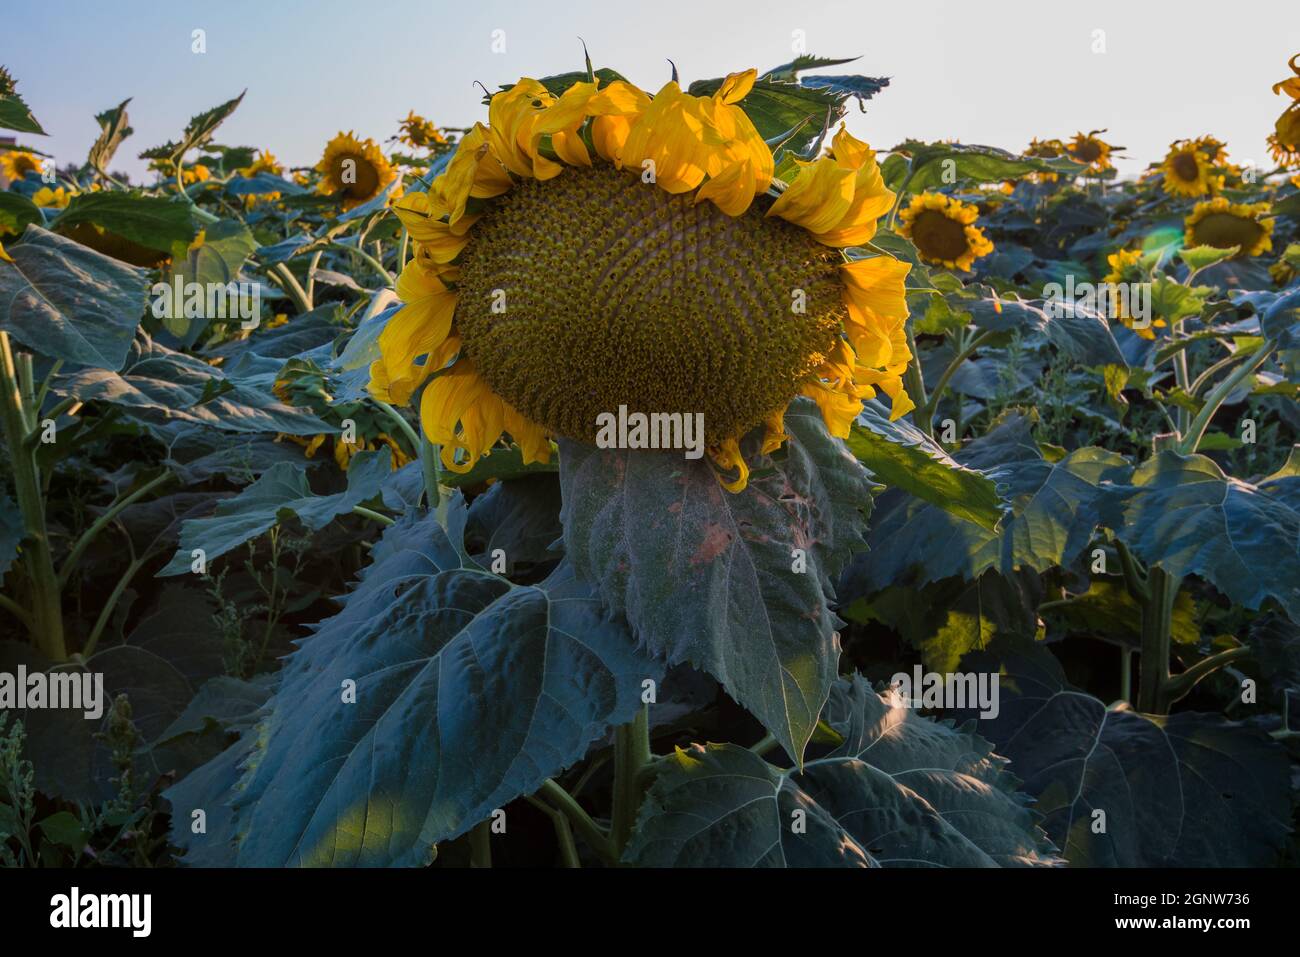 Sunflowers in late afternoon light.  Fall is approaching when large sunflowers are in full bloom and fill the open fields. Stock Photo